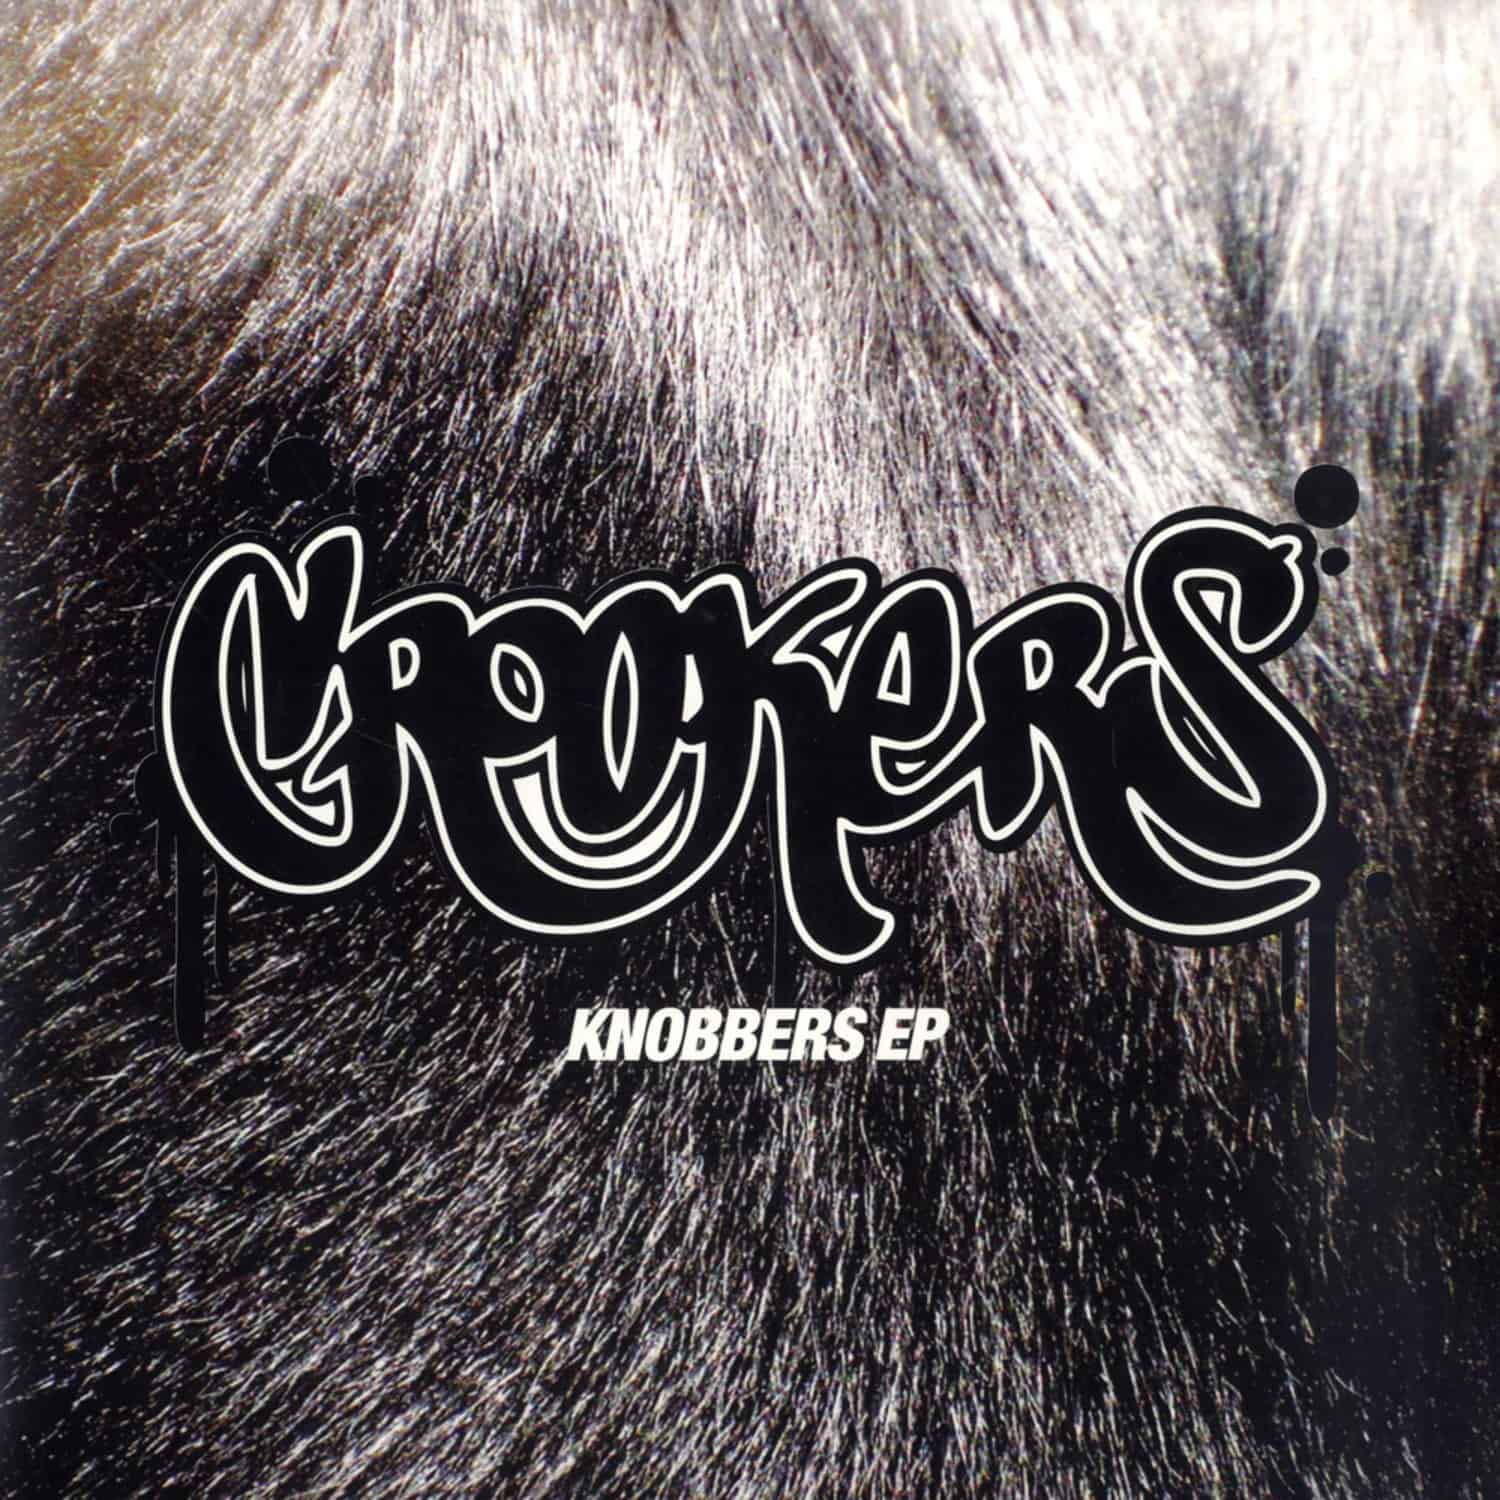 Crookers - KNOBBERS EP